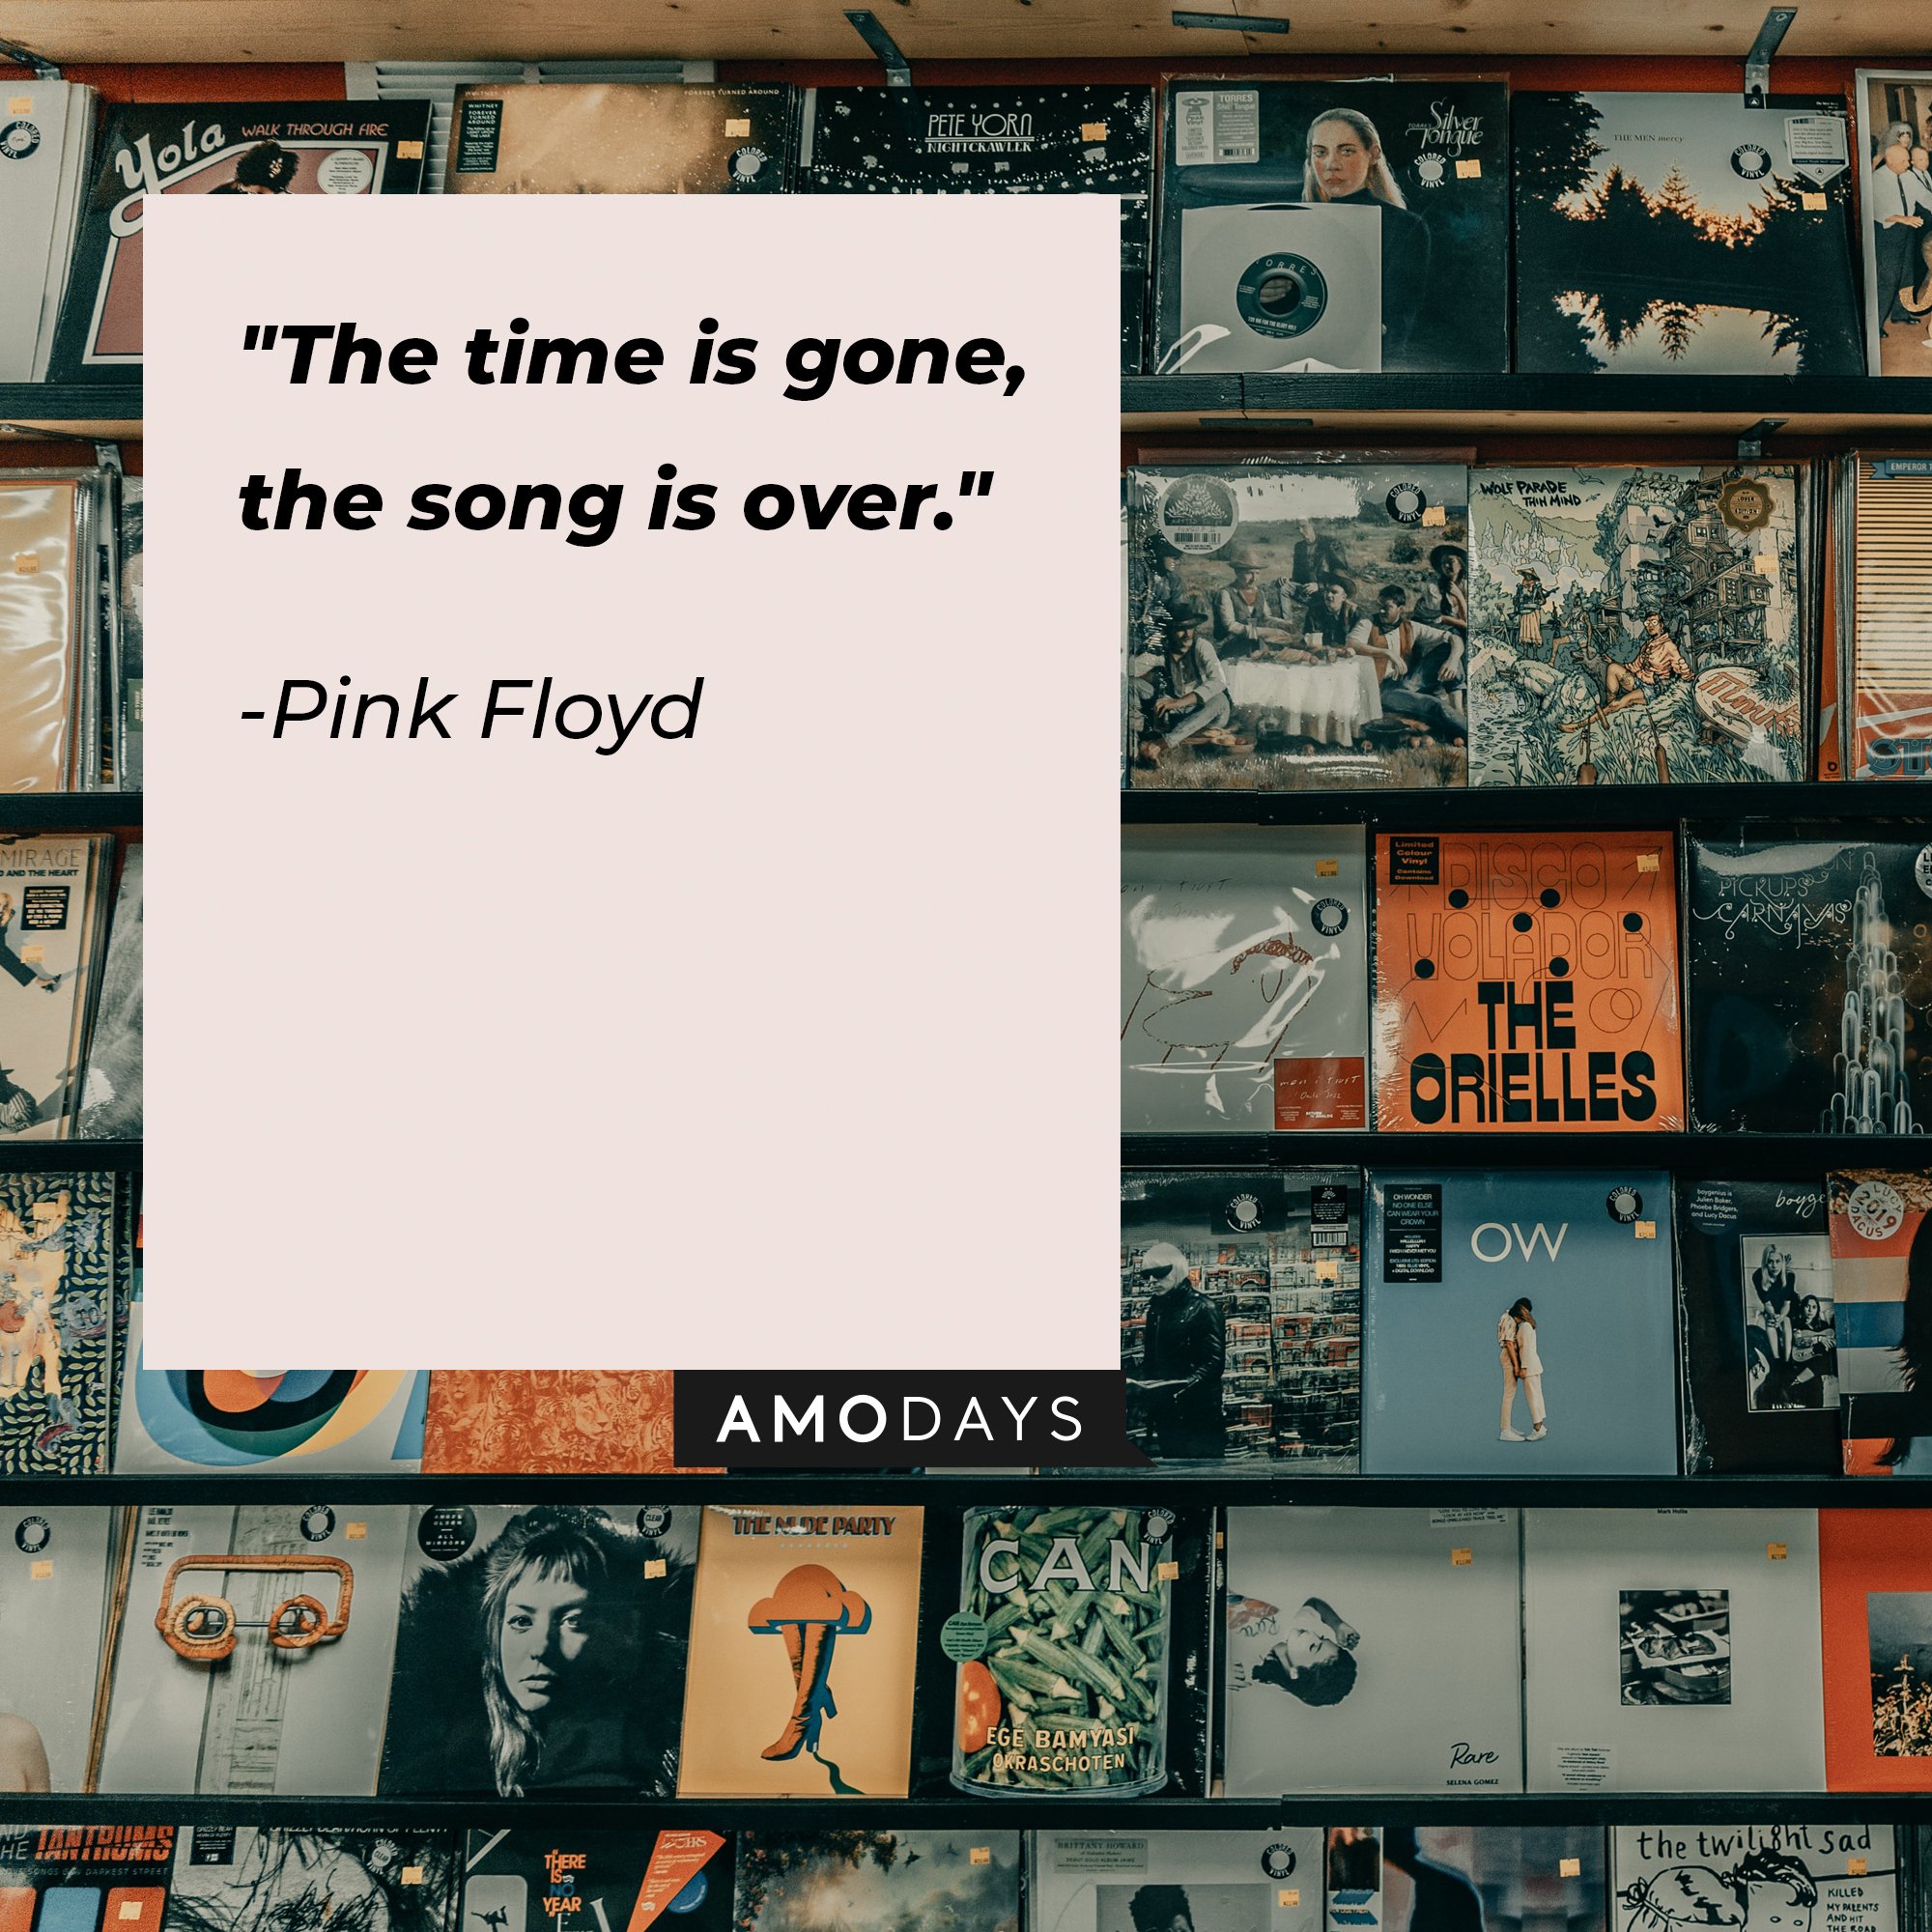 Pink Floyd's quote: "The time is gone, the song is over." | Image: AmoDays